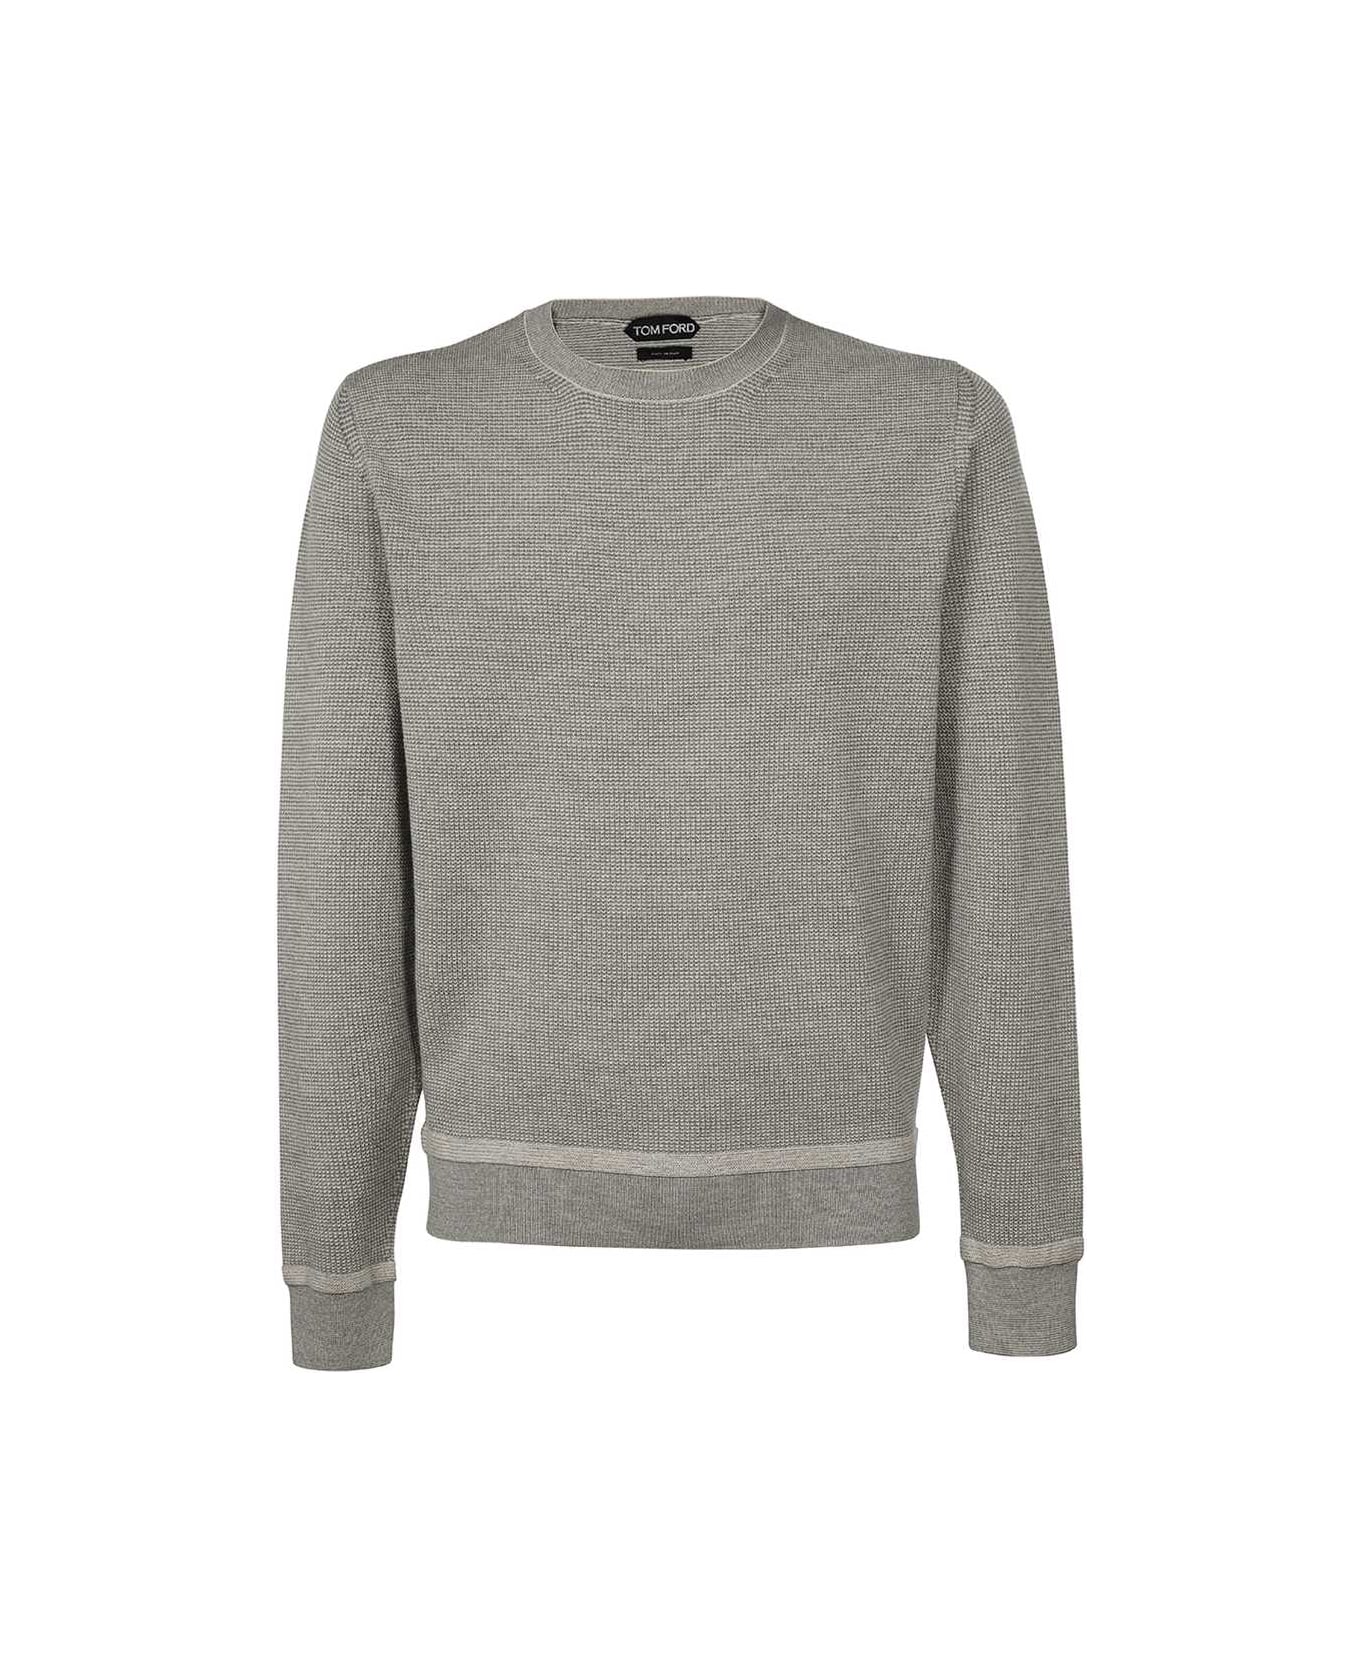 Tom Ford Cotton-cashmere Blend Sweater - grey